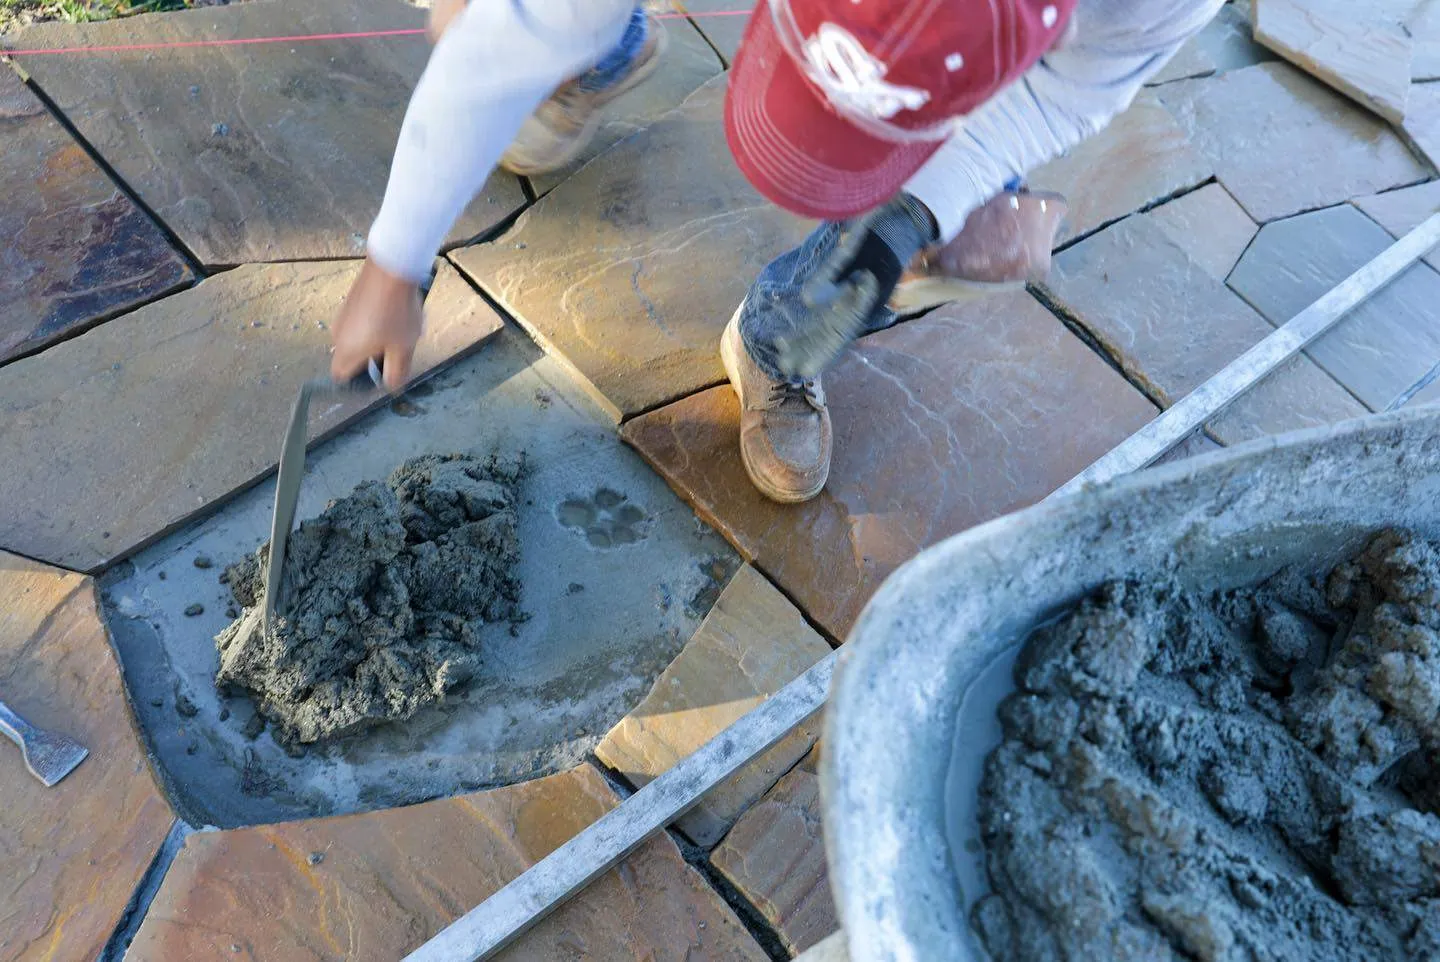 Stamped Concrete Services